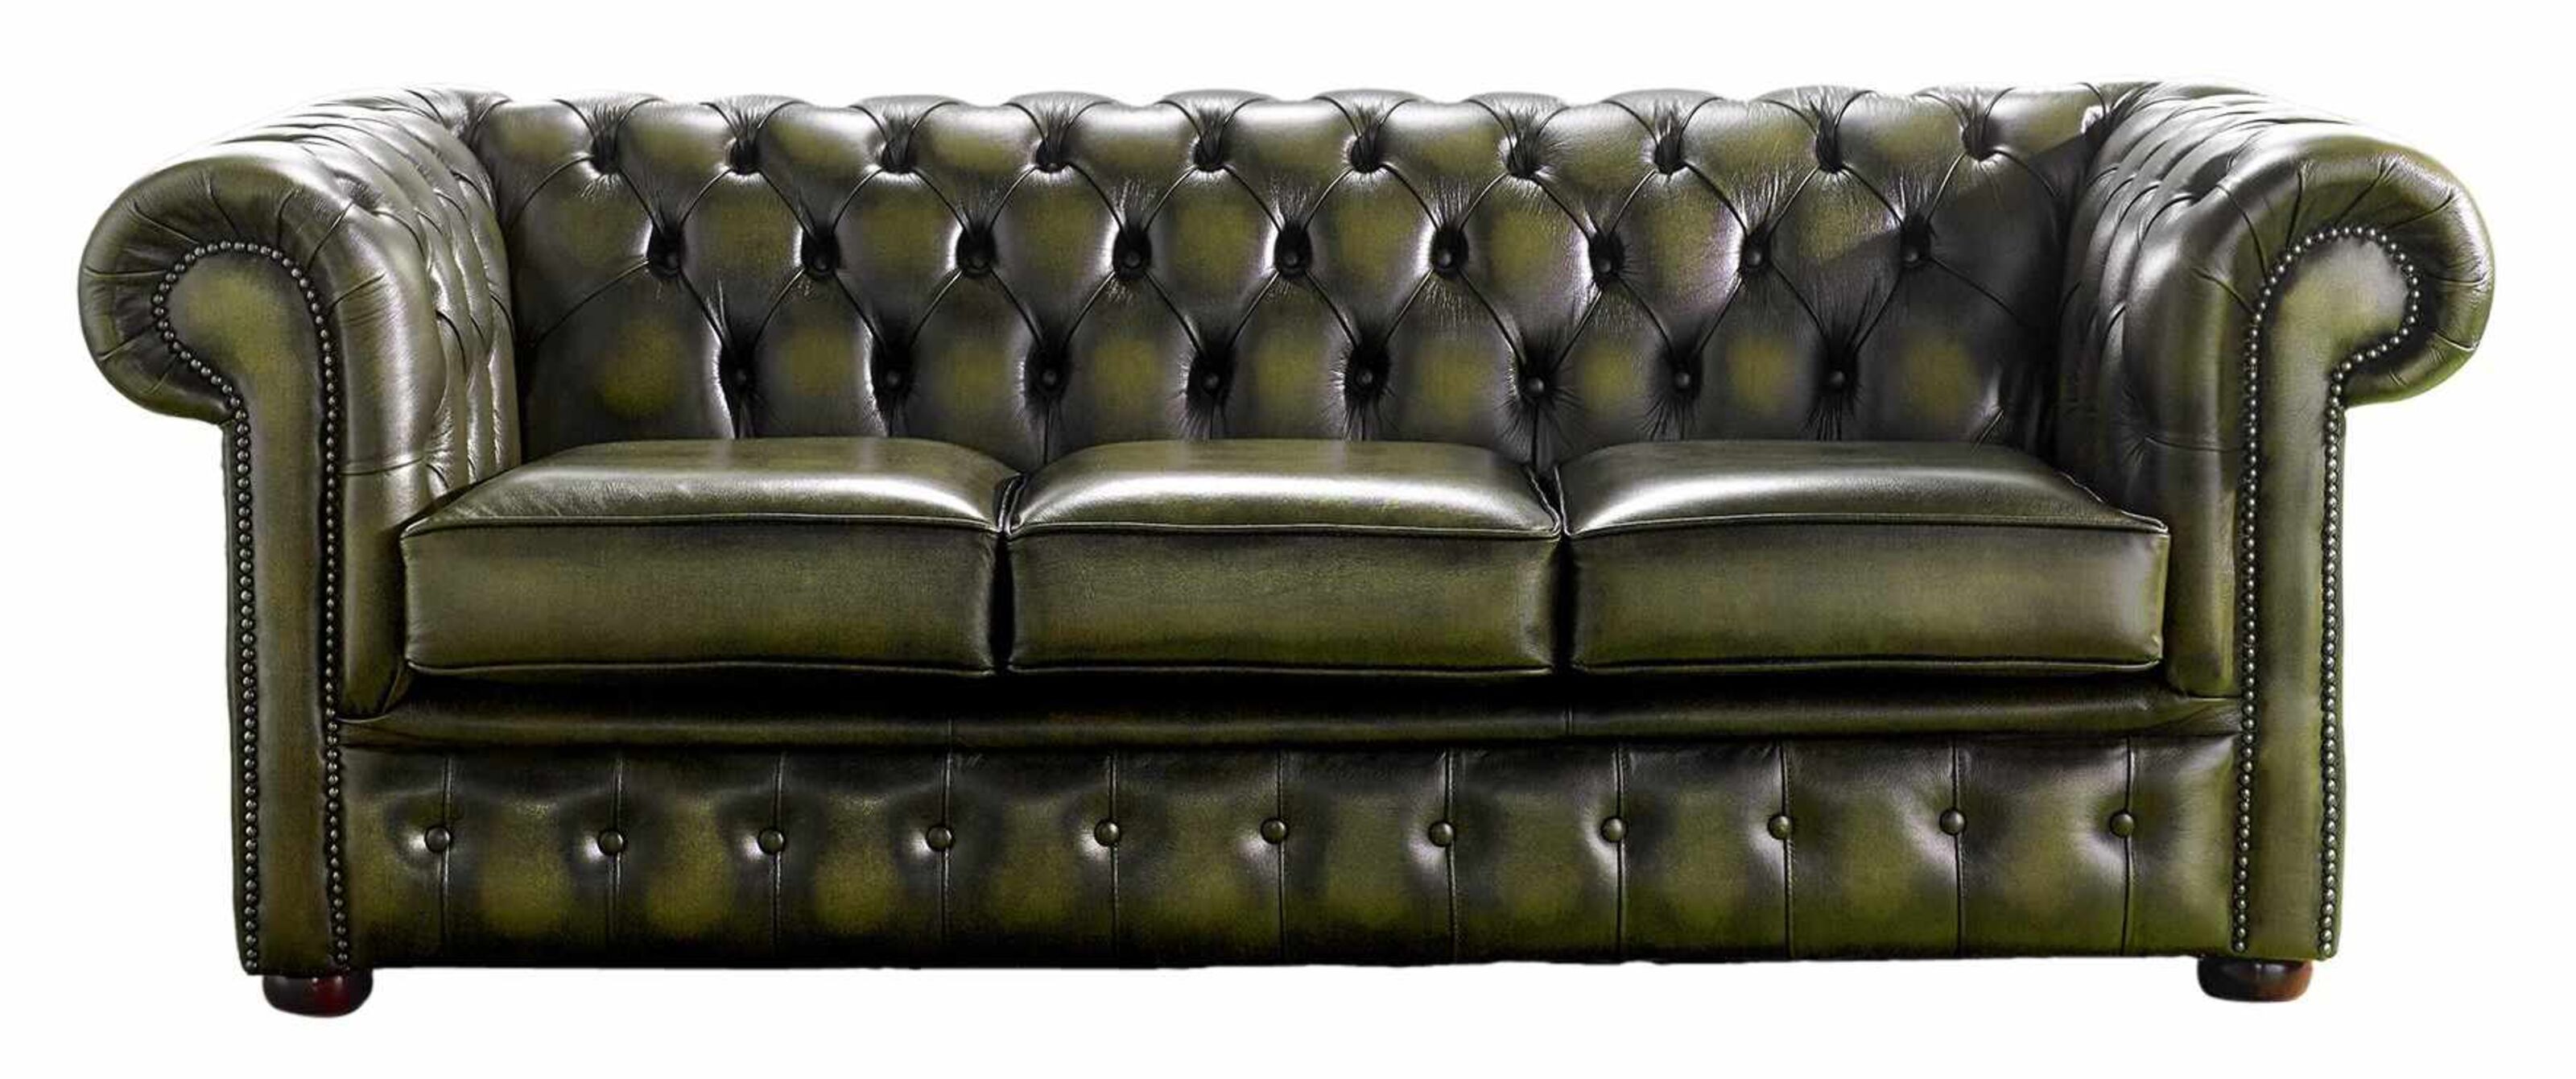 Timeless Charm Discover DFS's Range of Chesterfield Sofas  %Post Title